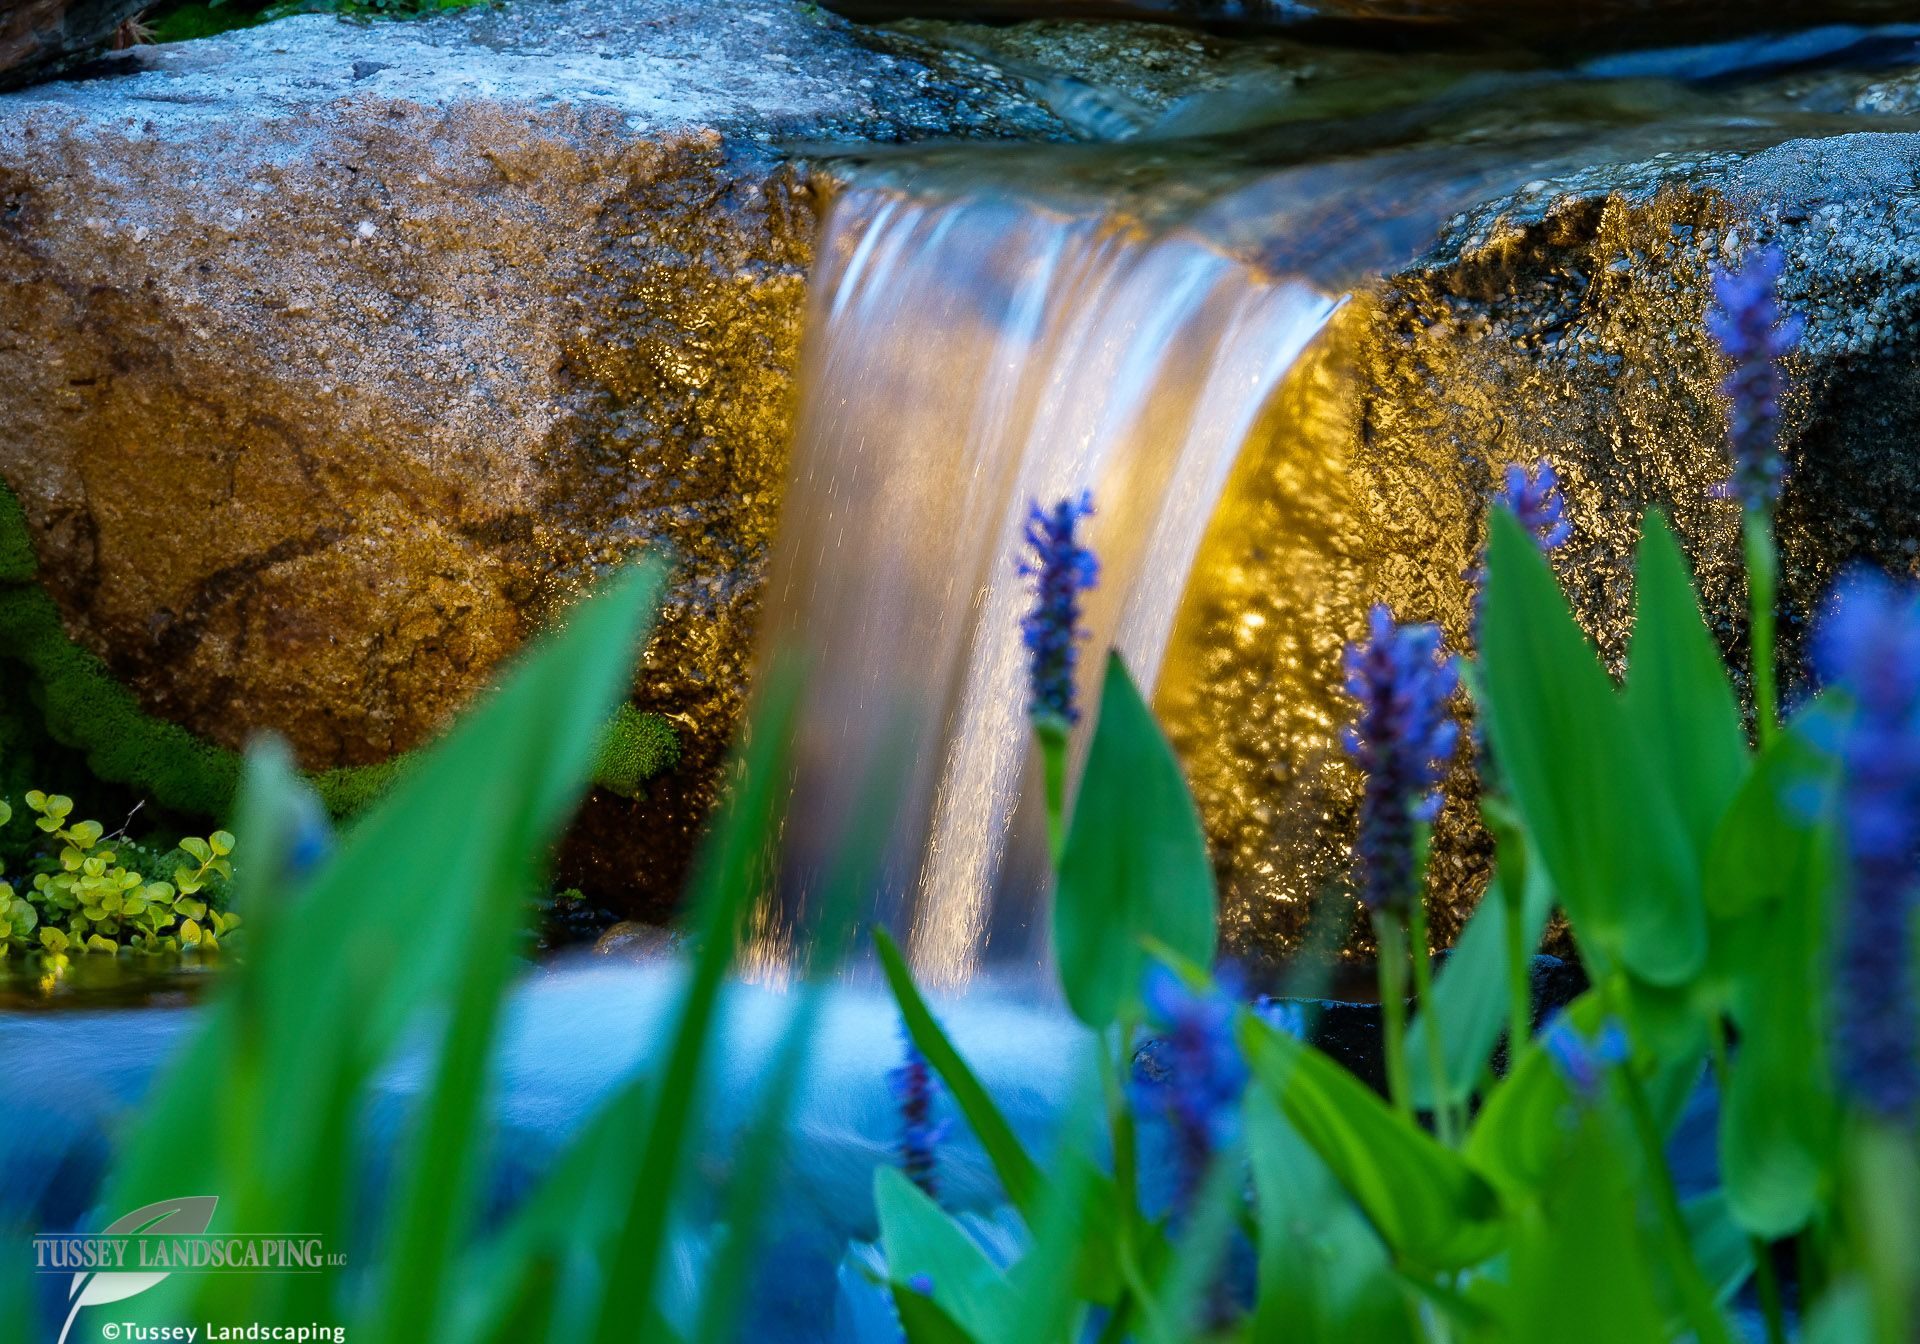 A waterfall in a garden with blue flowers.